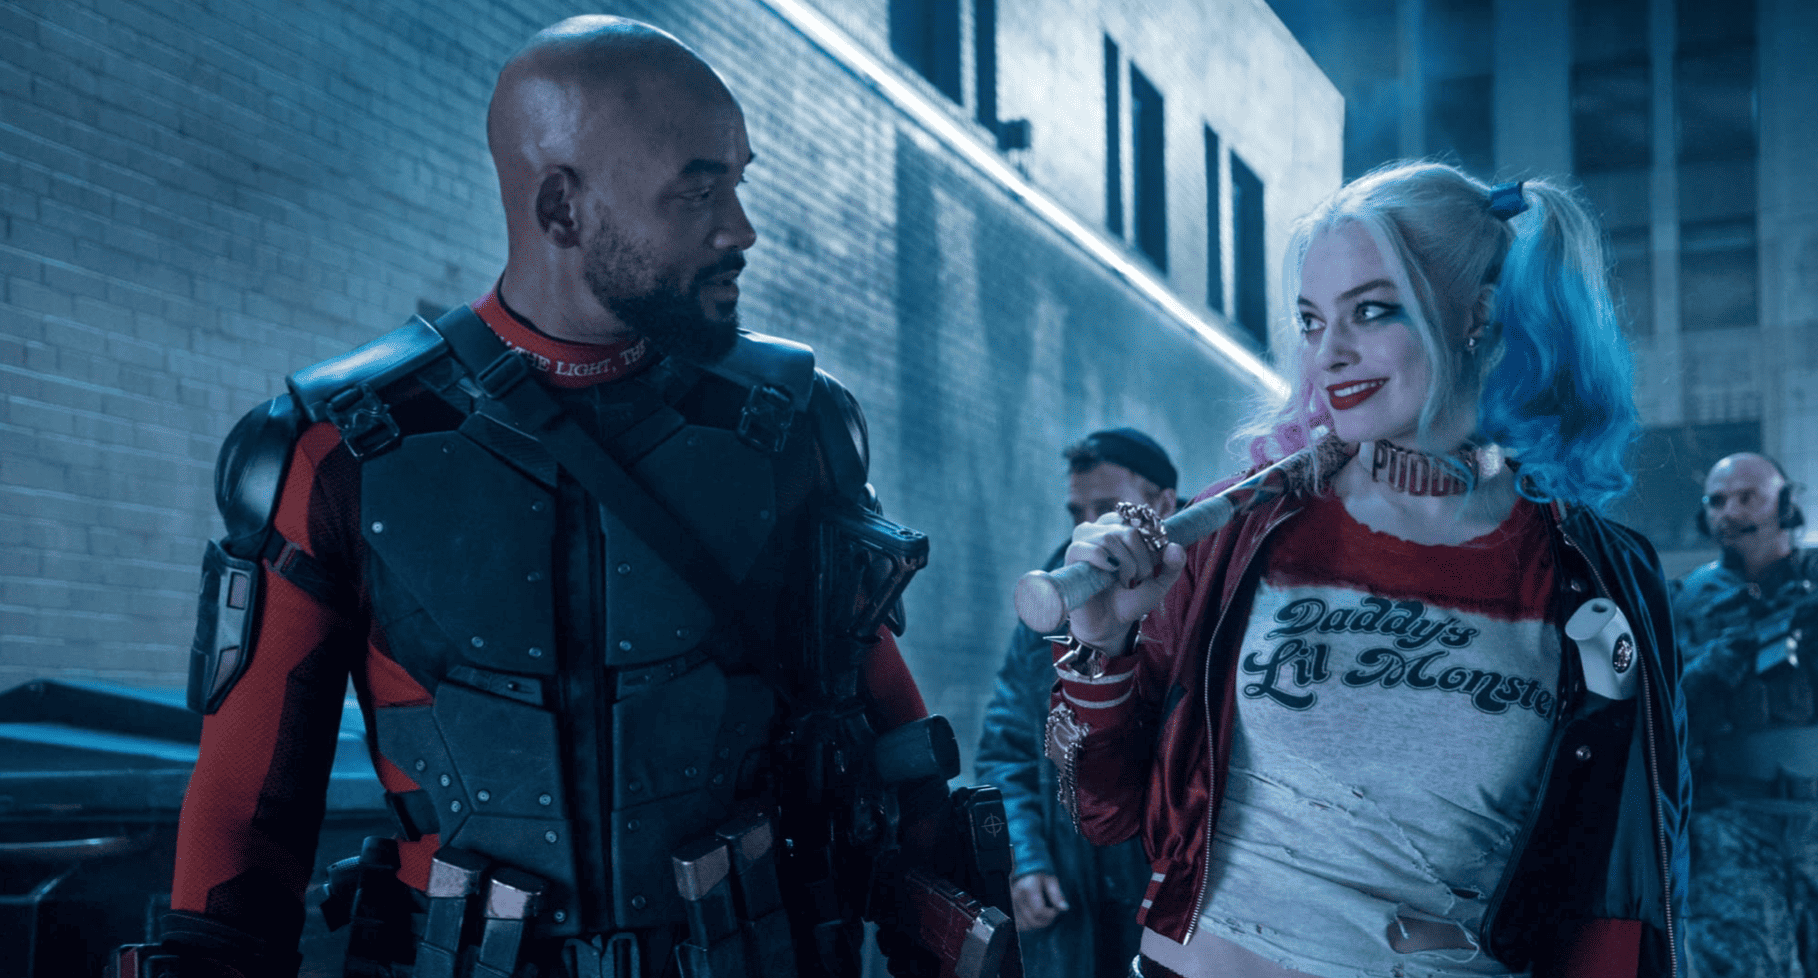 Margot Robbie as Harley Quinn gives a side look to Will Smith’s Deadshot in this image from DC Entertainment